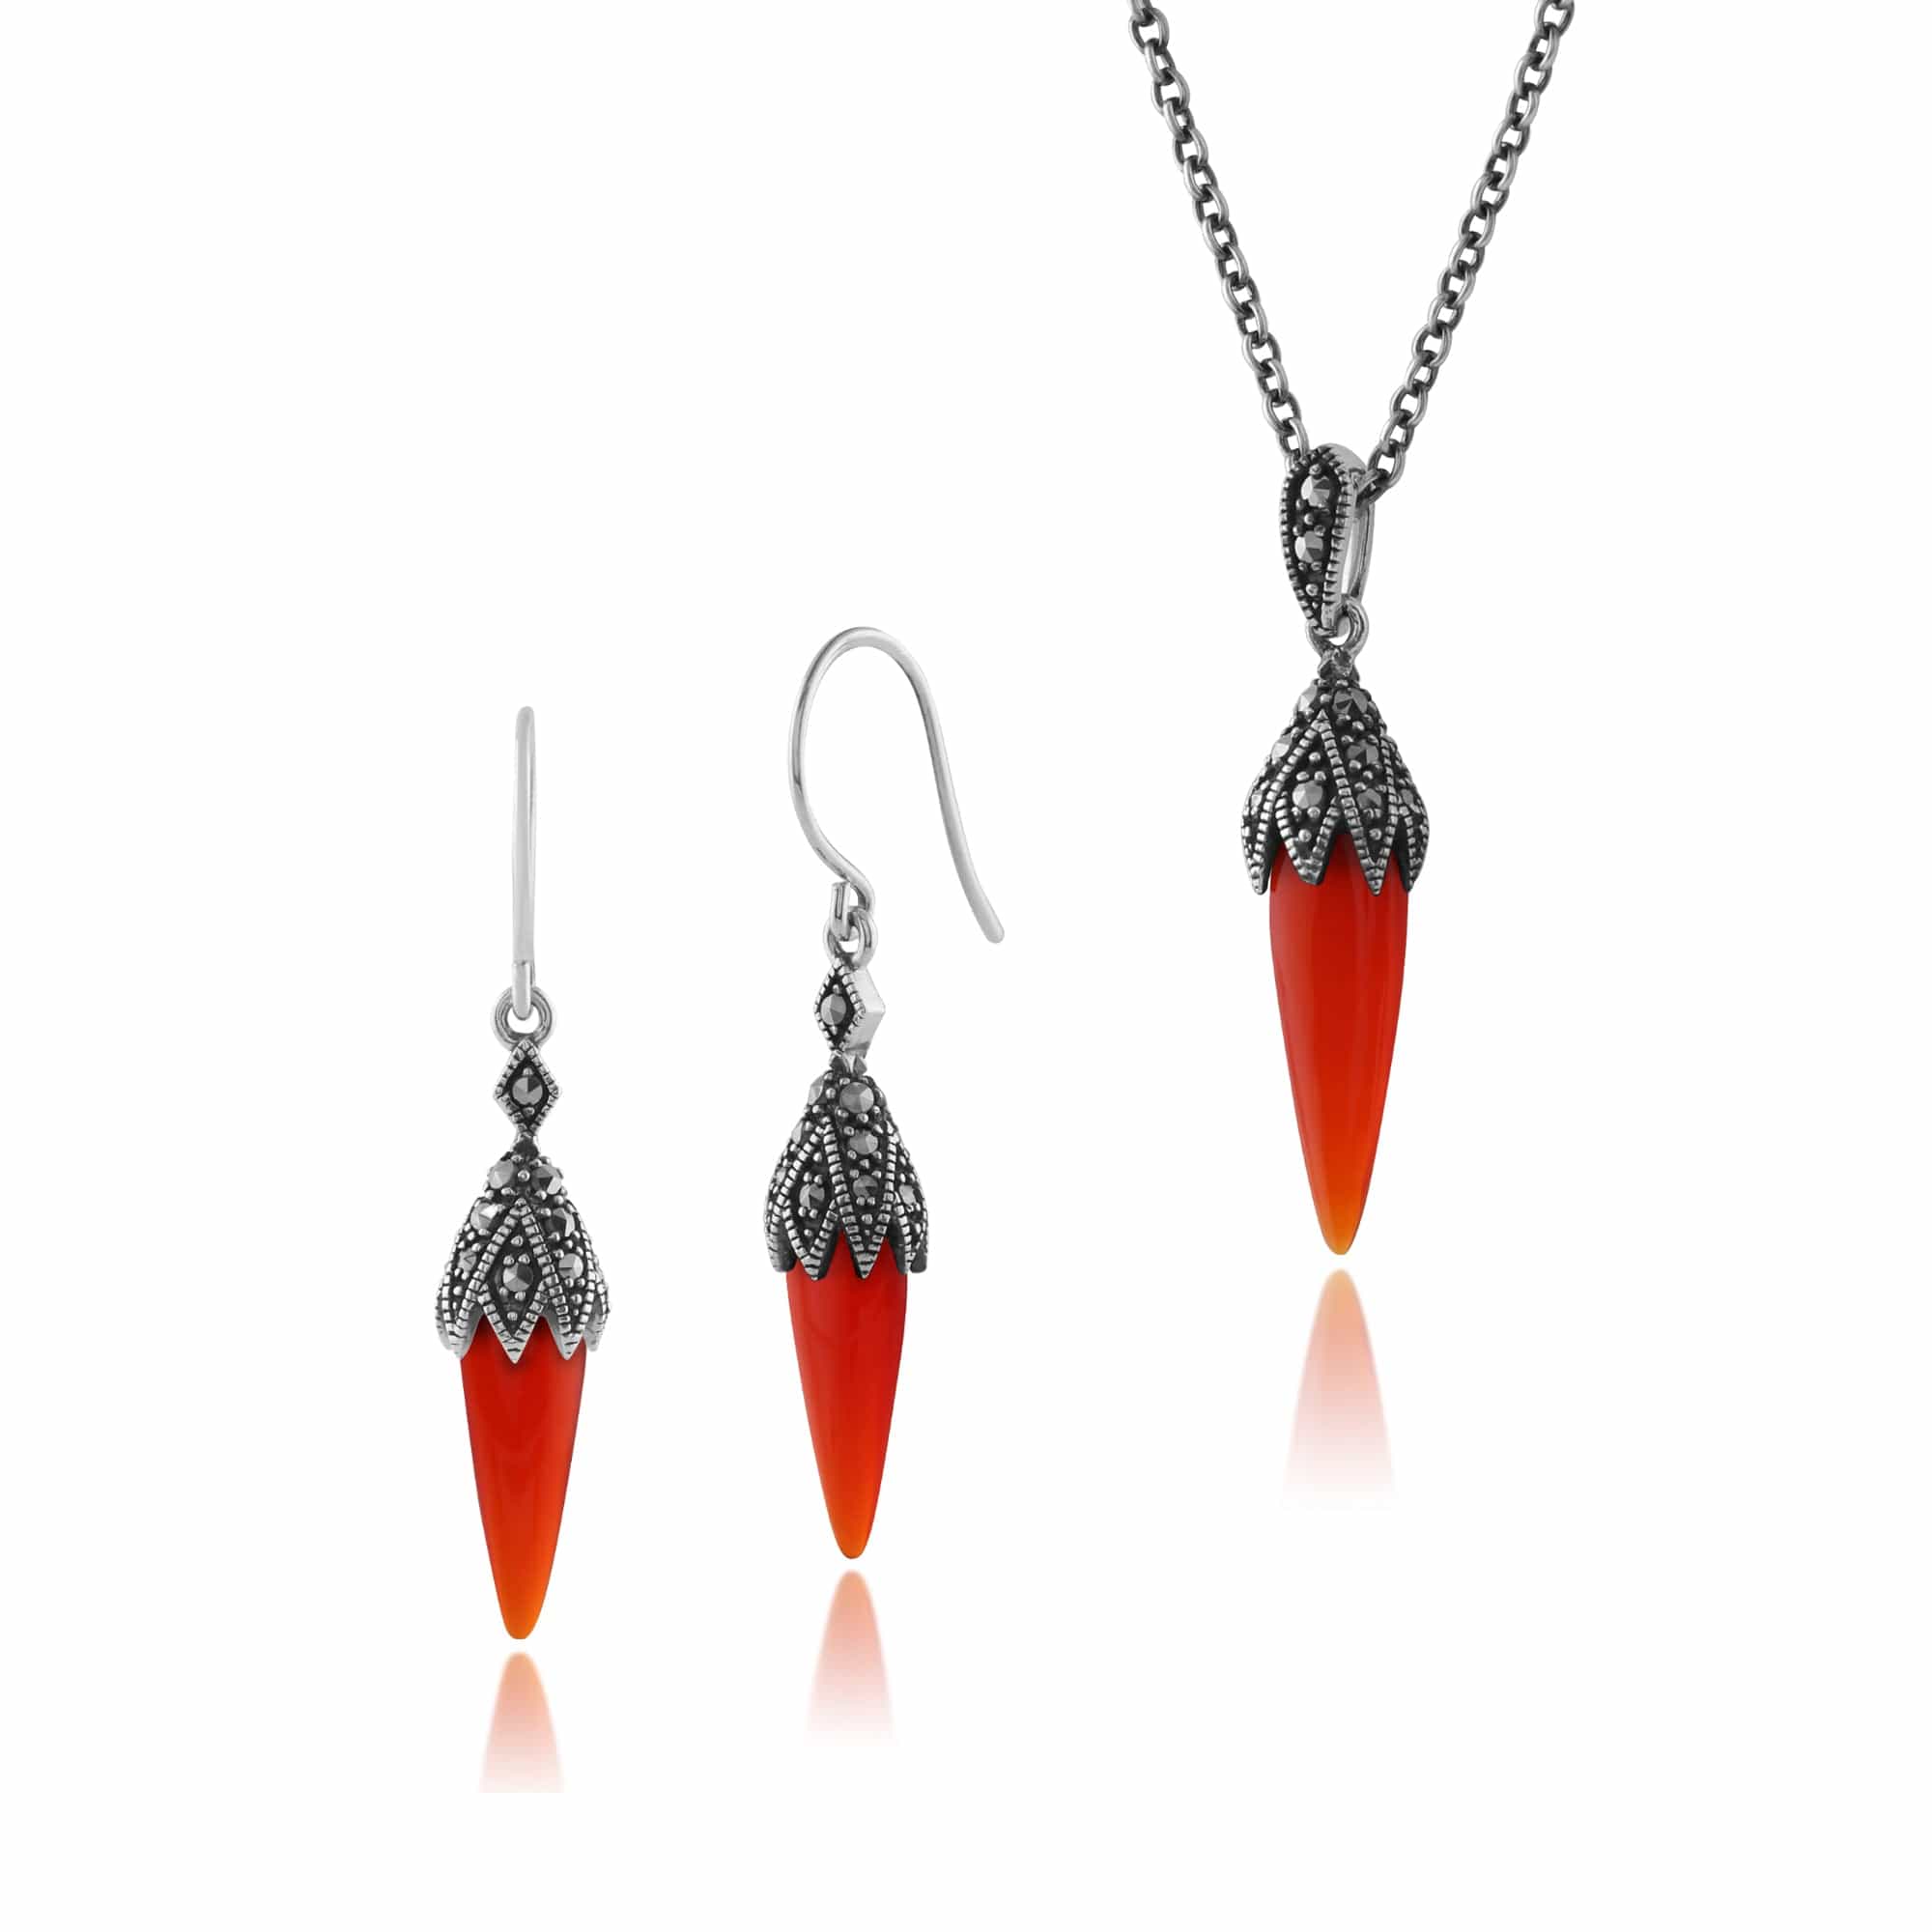 214E822901925-214N658401925 Art Deco Style Style Red Carnelian Cabochon & Marcasite Pointed Drop Earrings & Pendant Set in 925 Sterling Silver 1